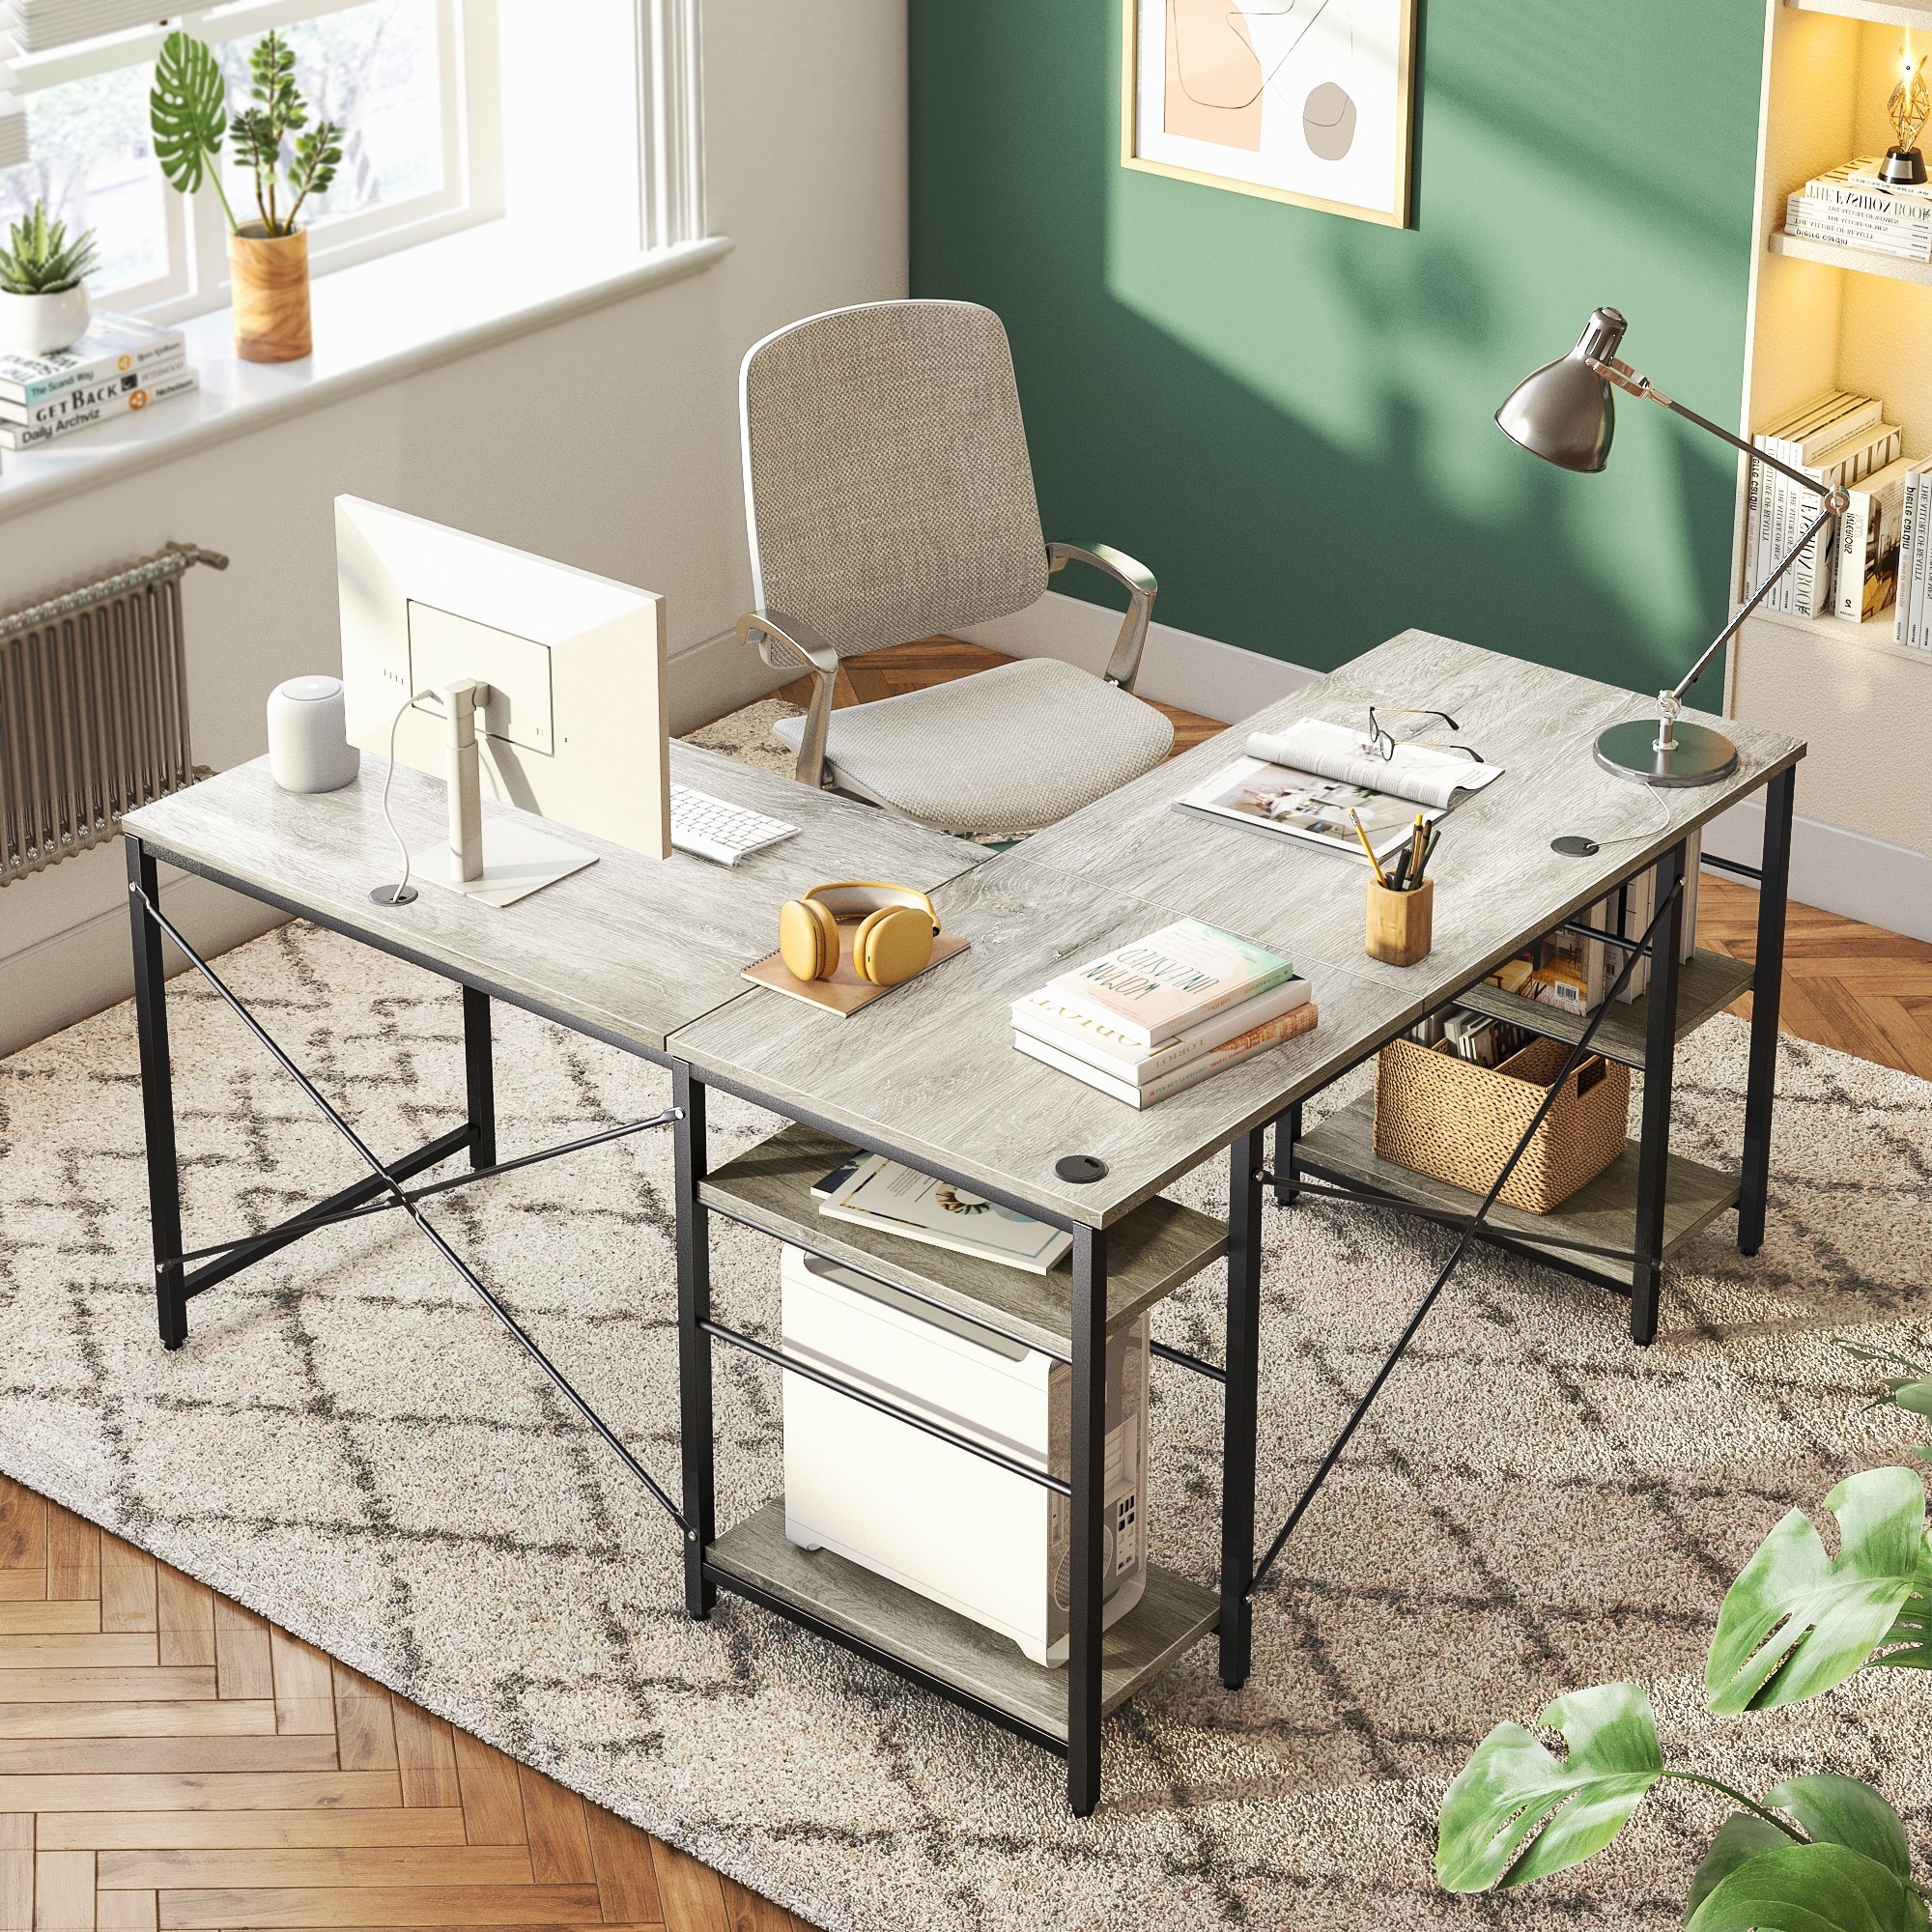 Industrial L-shaped Computer Desk with Cabinet, Home Office